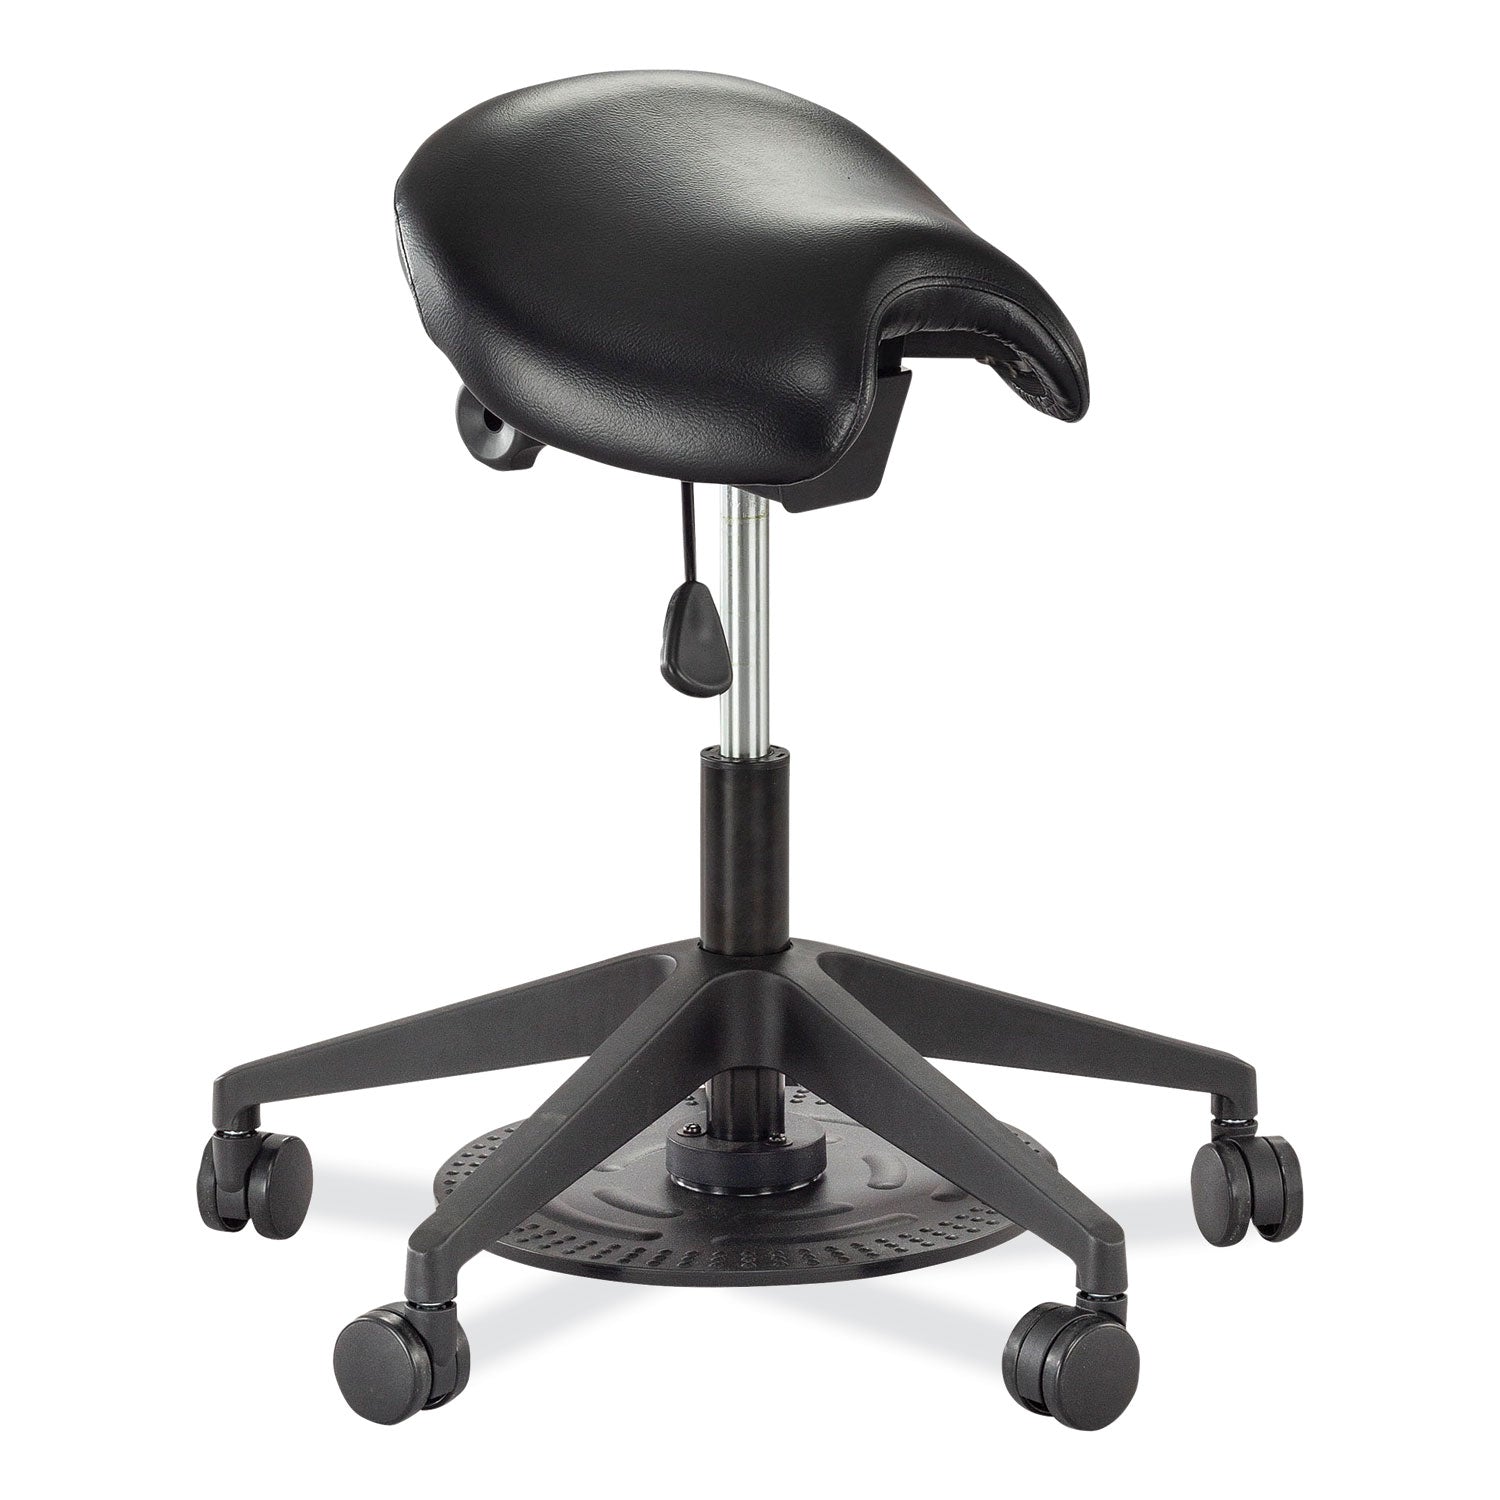 saddle-seat-lab-stool-backless-supports-up-to-250-lb-2125-2625-high-black-seat-black-base-ships-in-1-3-business-days_saf3438bl - 1